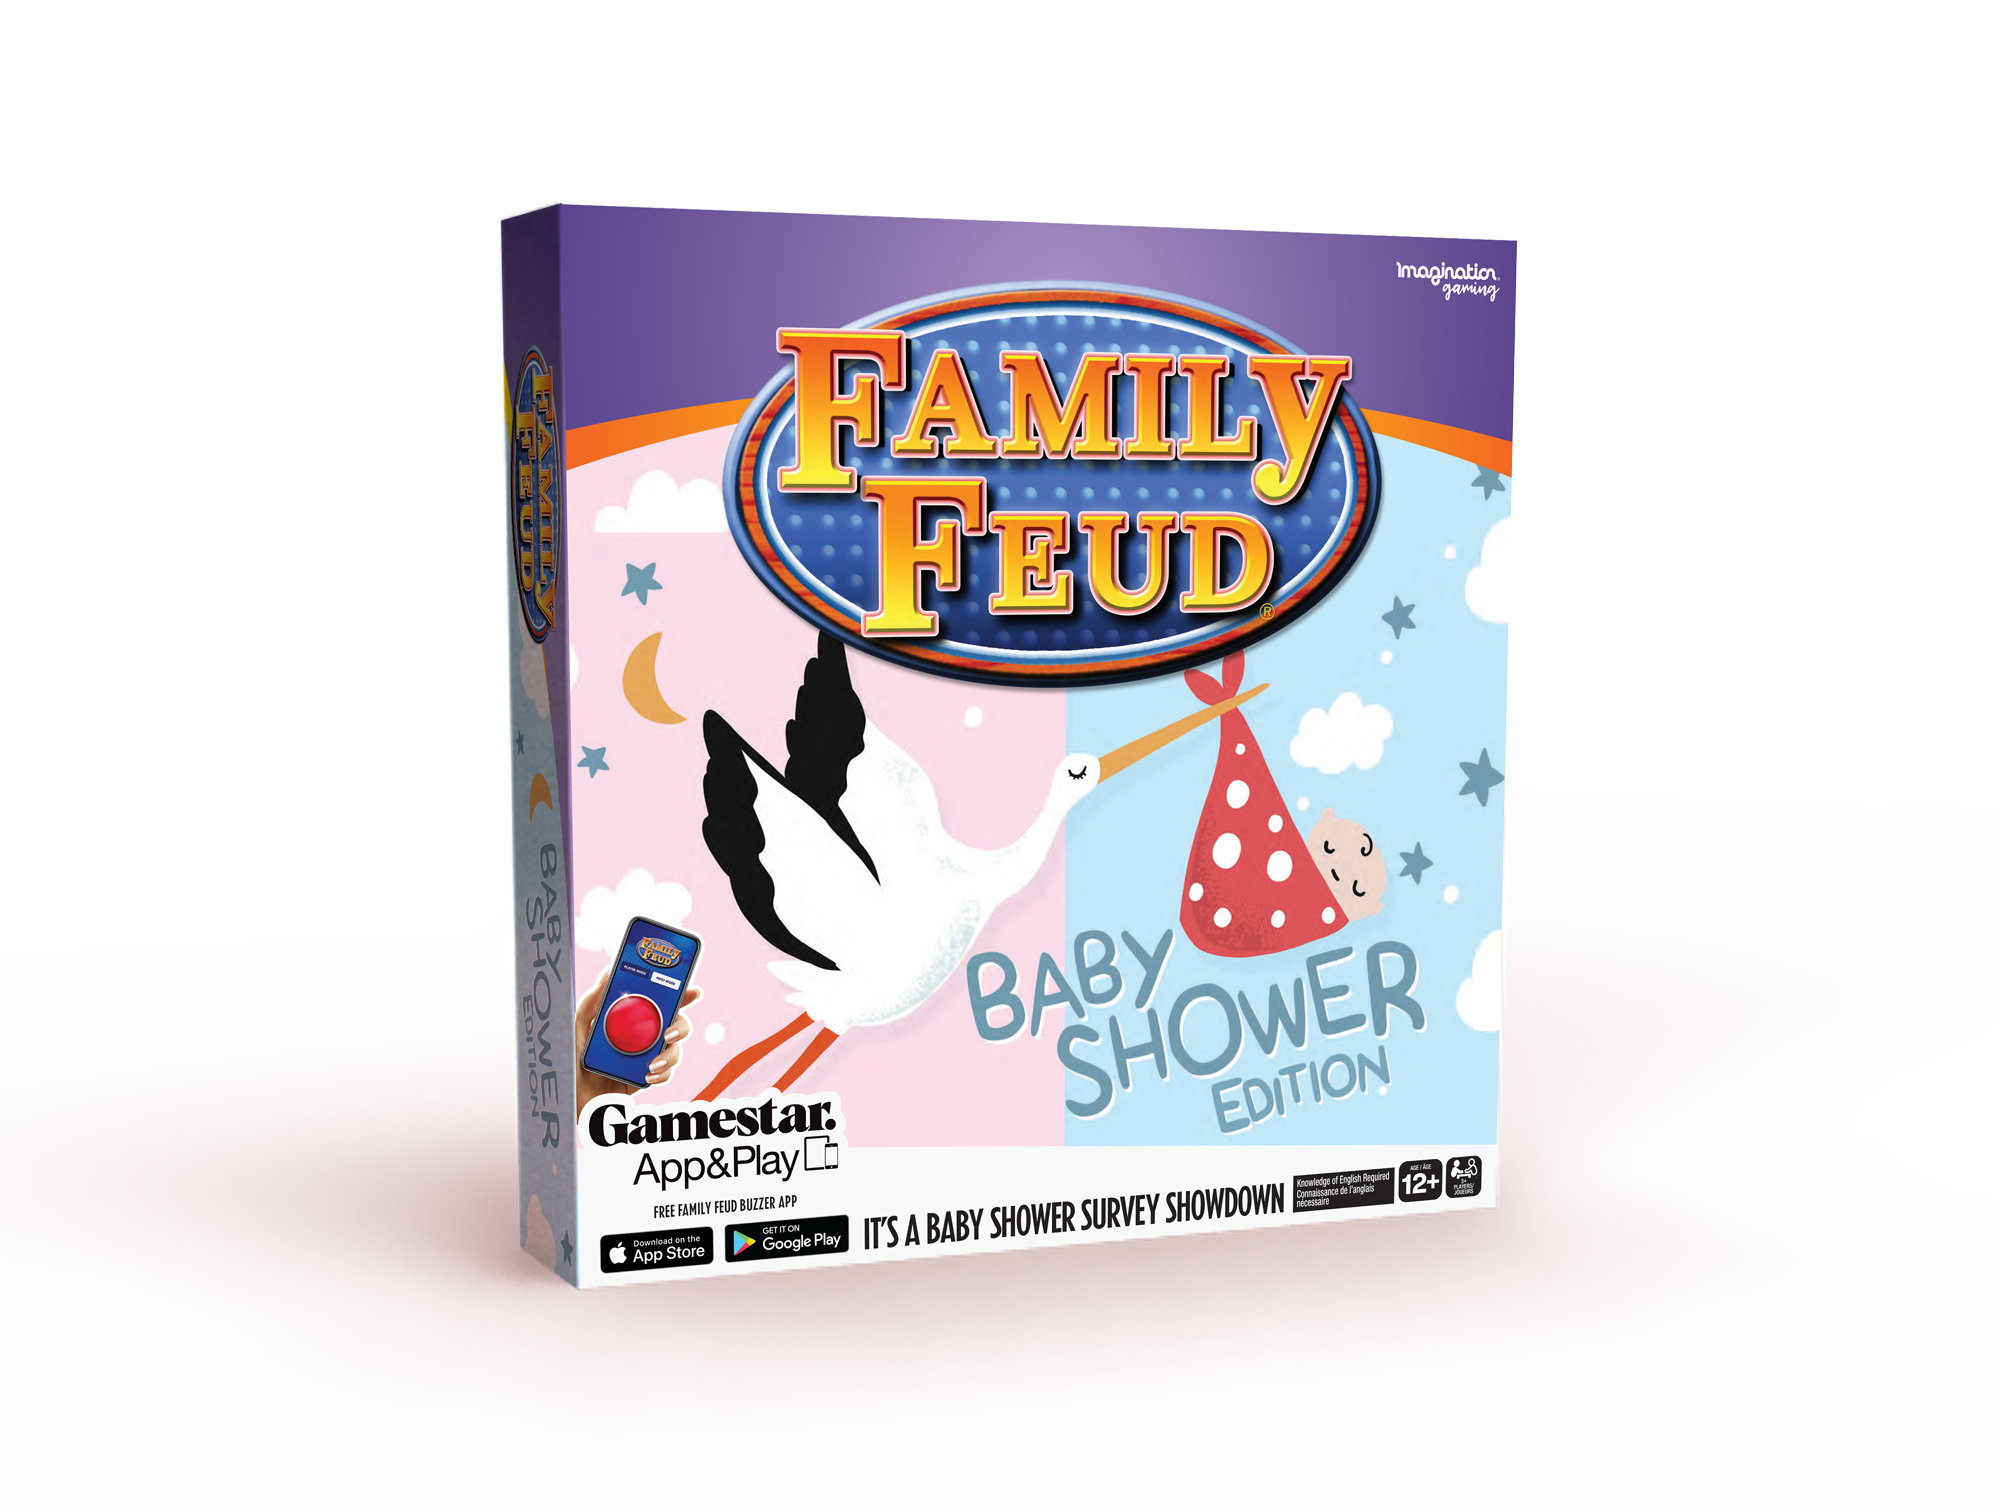 Feud Game for Google on the App Store